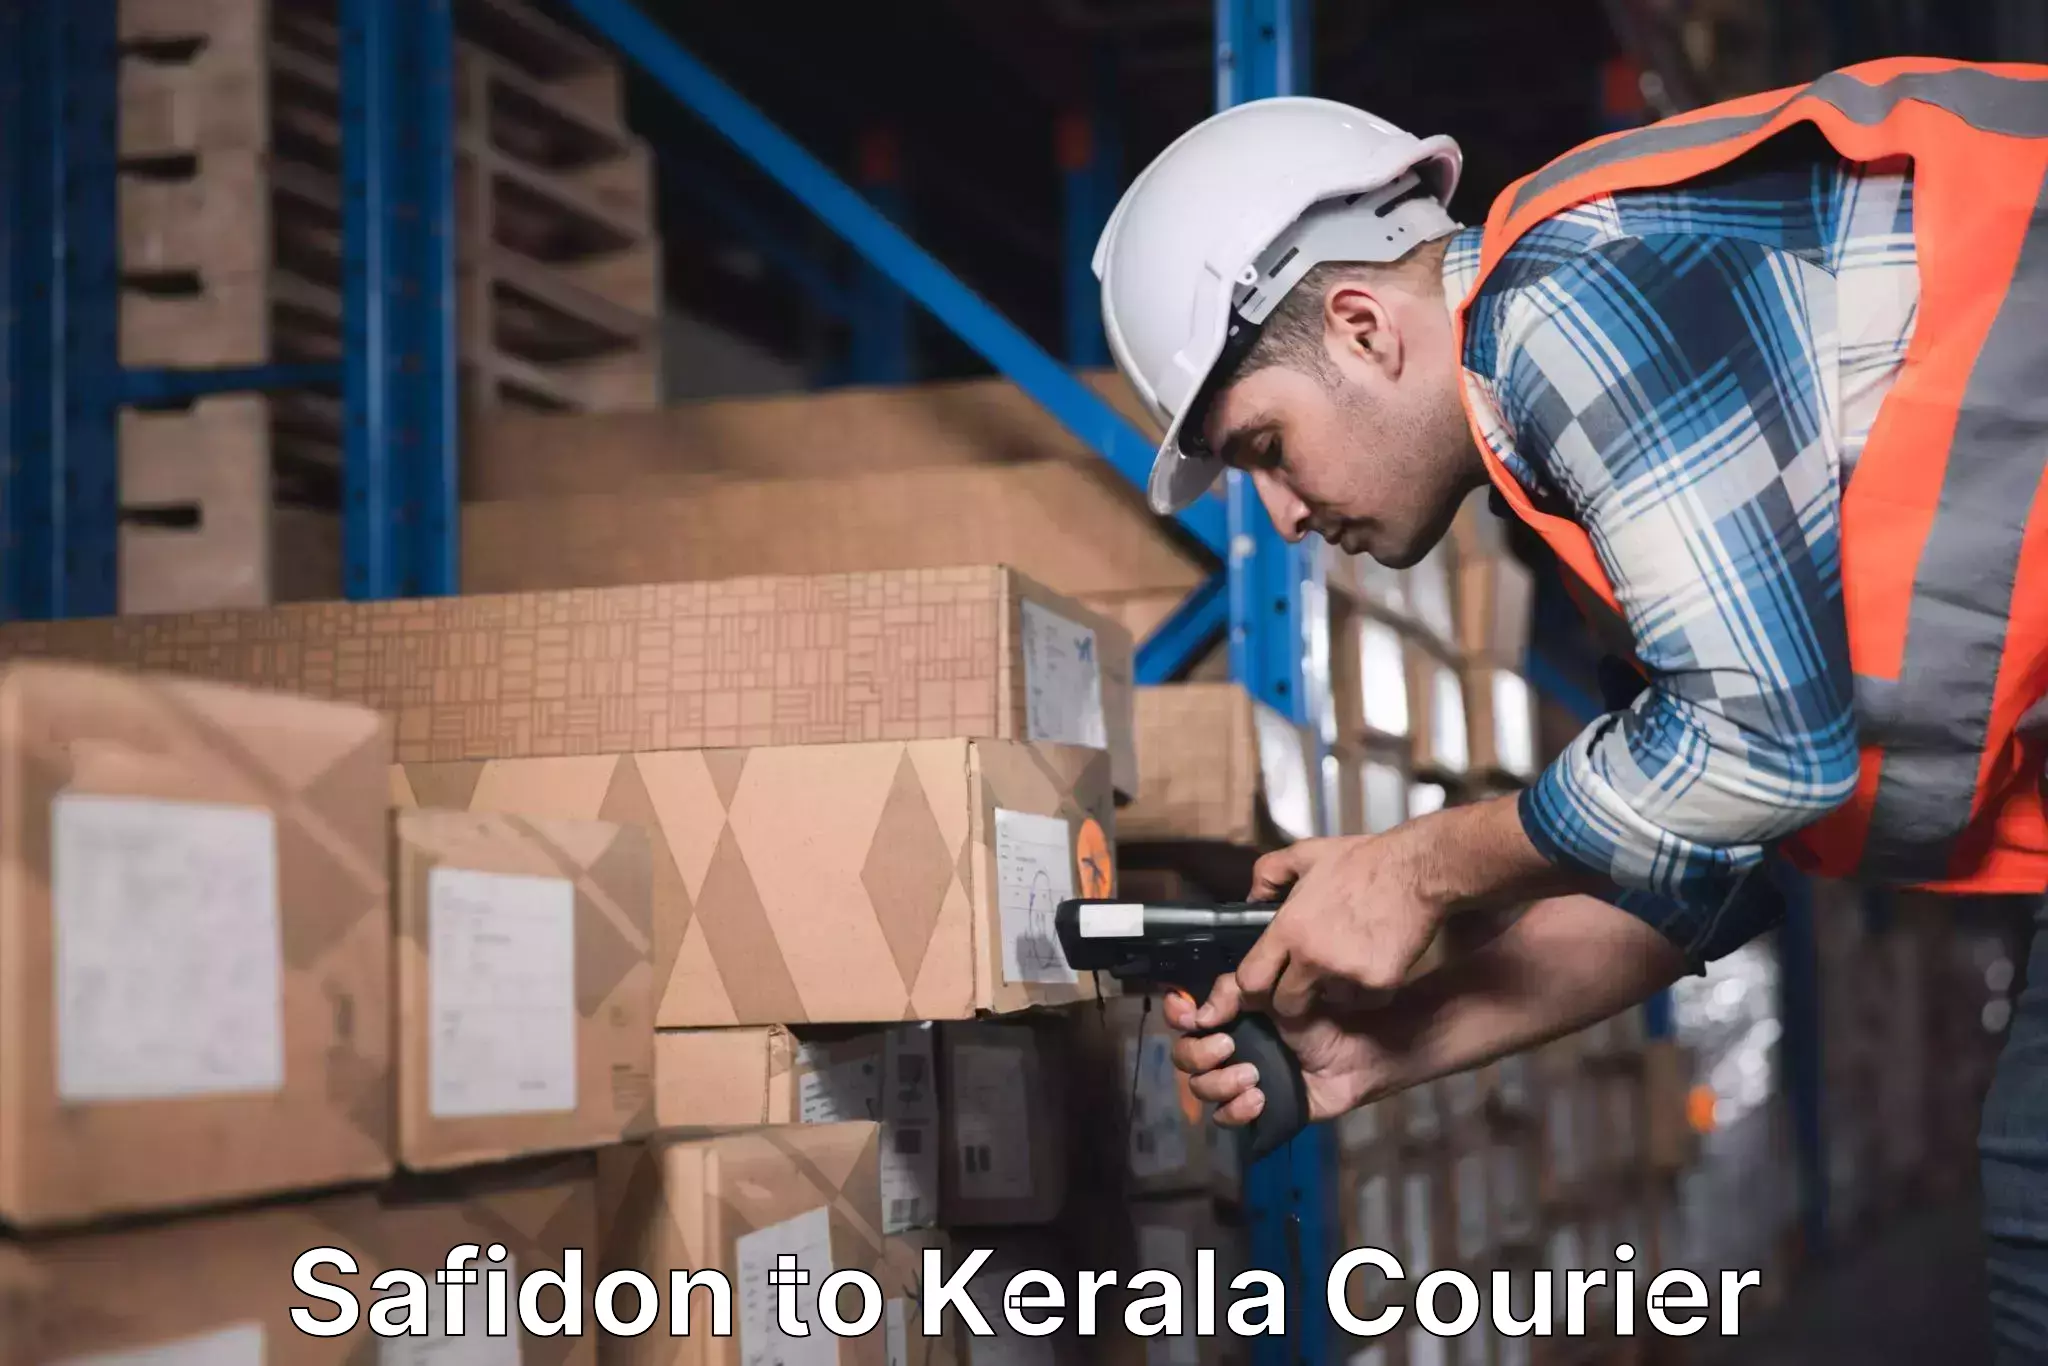 Reliable delivery network Safidon to Kerala